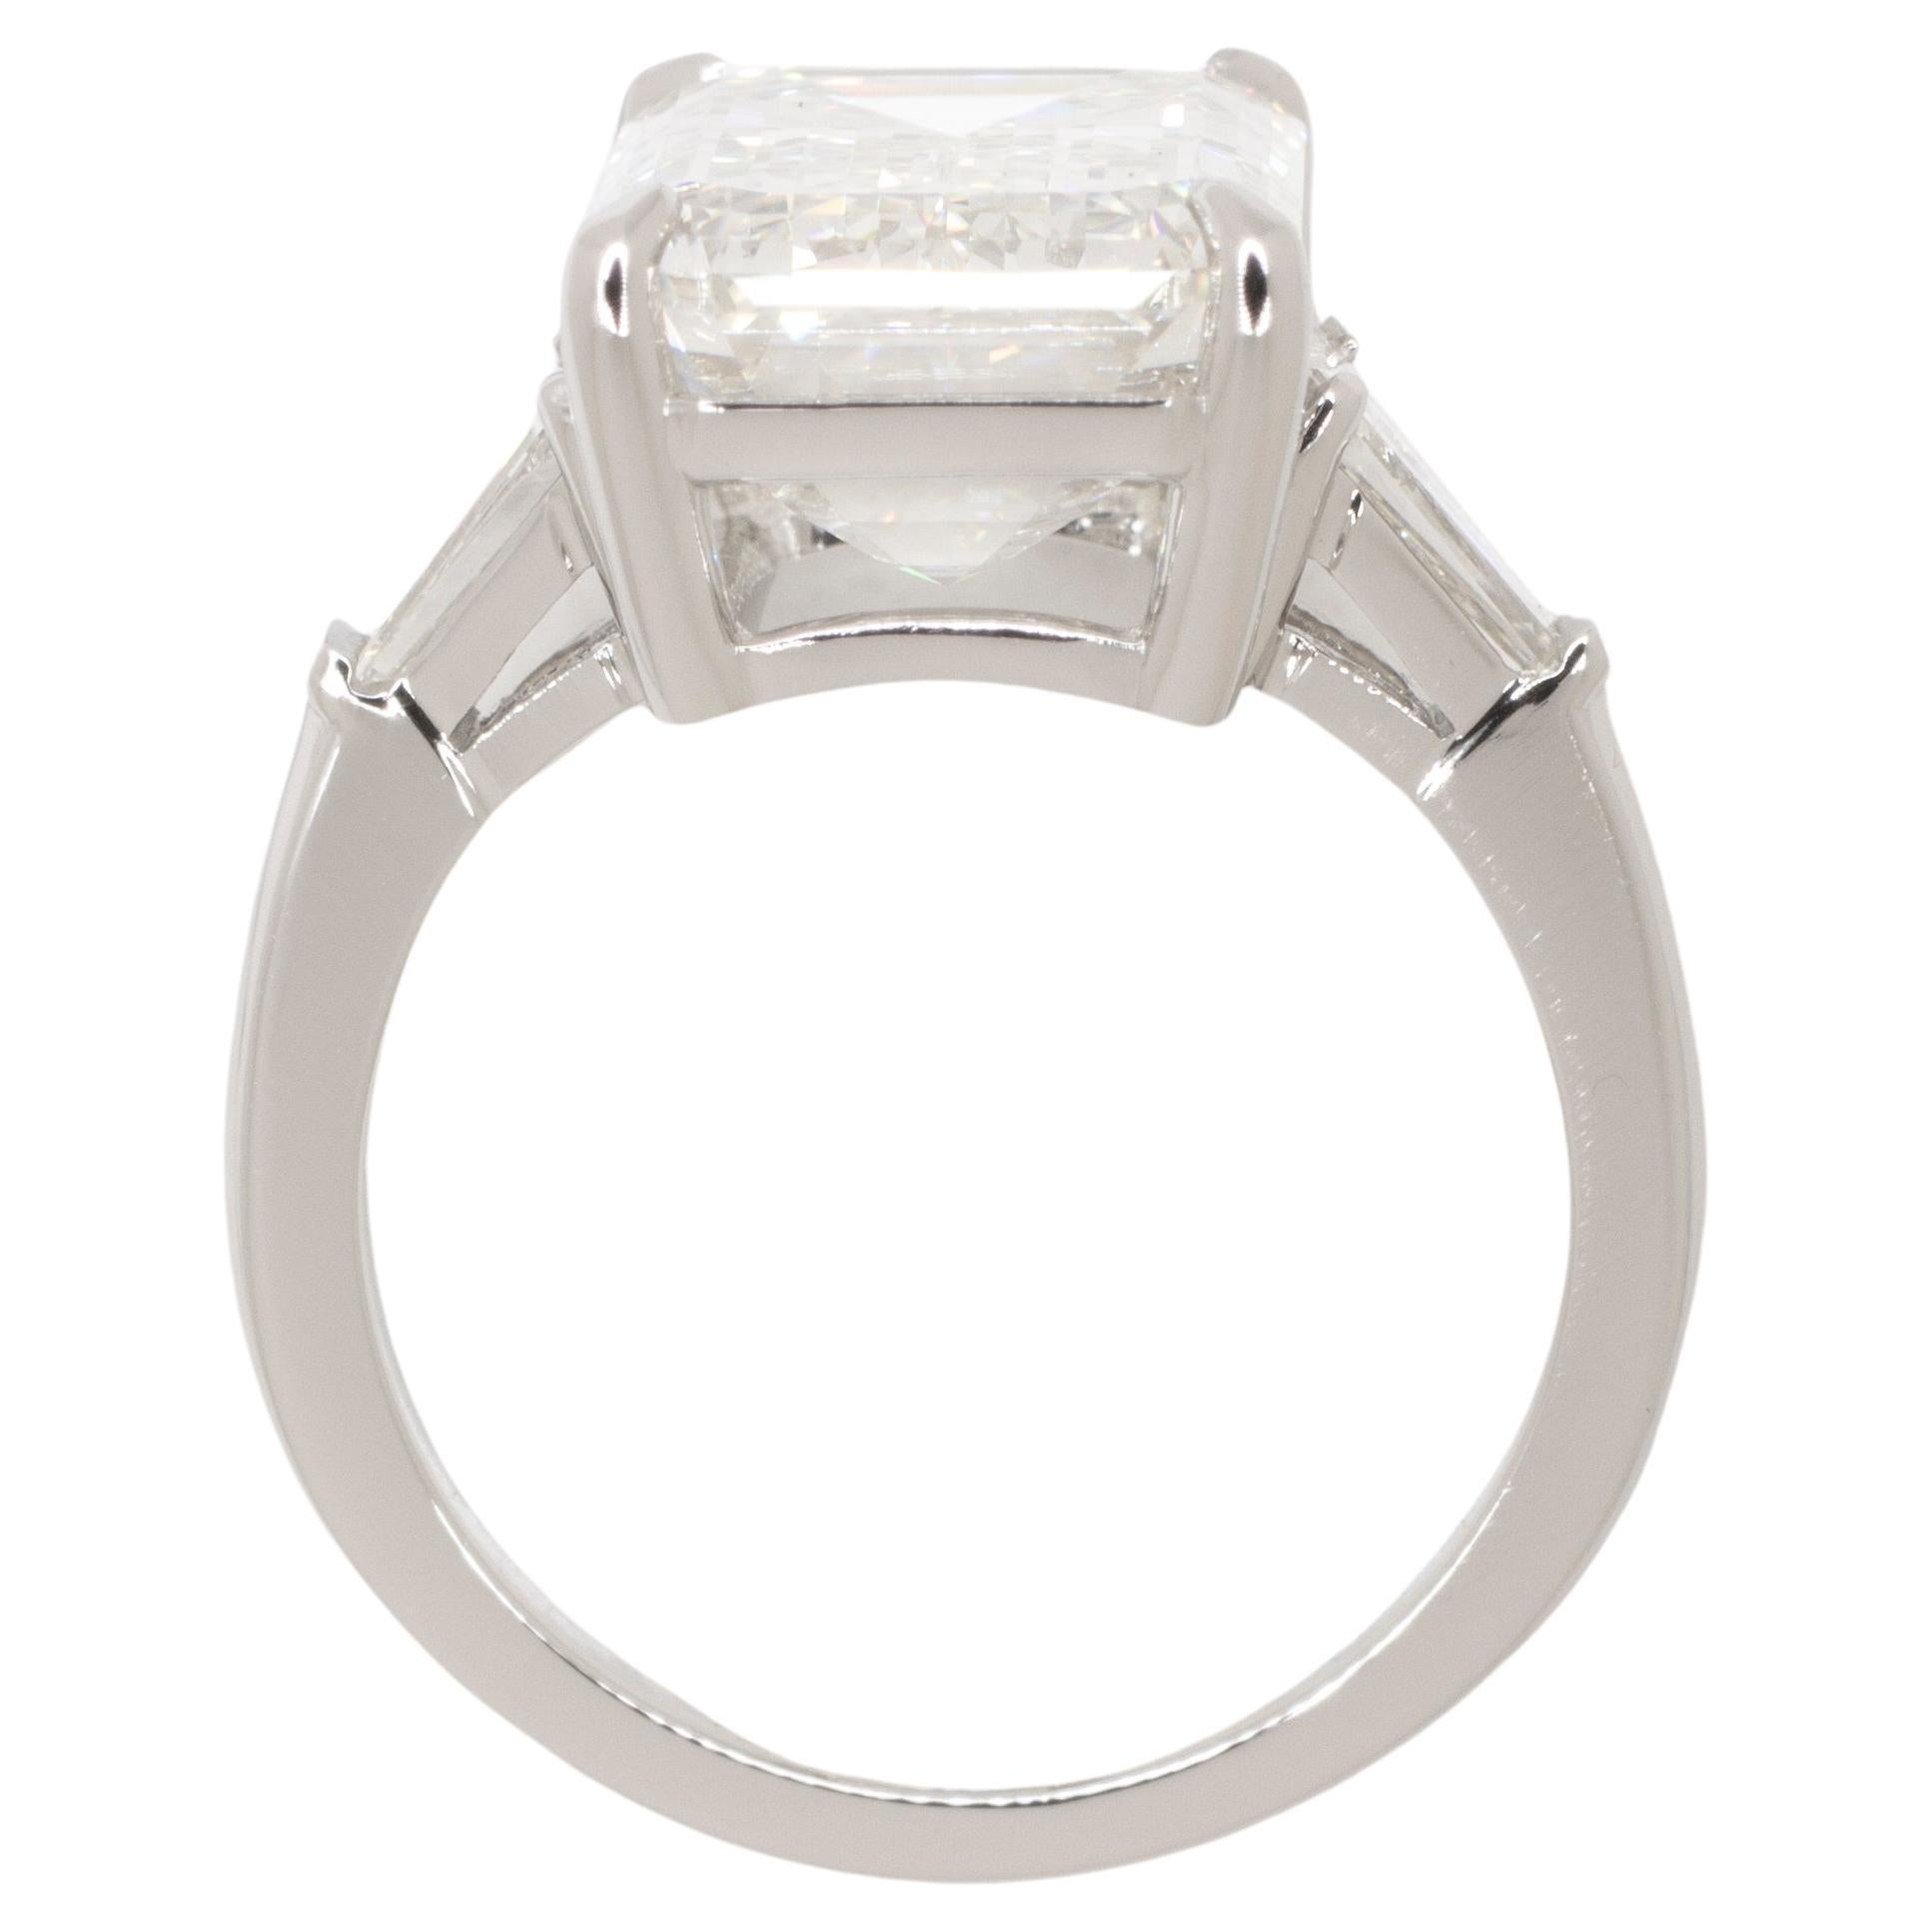 Elevate your style with the timeless elegance of this GIA Certified 4 Carat Emerald Cut Diamond Platinum Ring, accentuated by two tapered baguette diamonds. At its core, this exquisite ring features a stunning emerald-cut diamond, certified by the